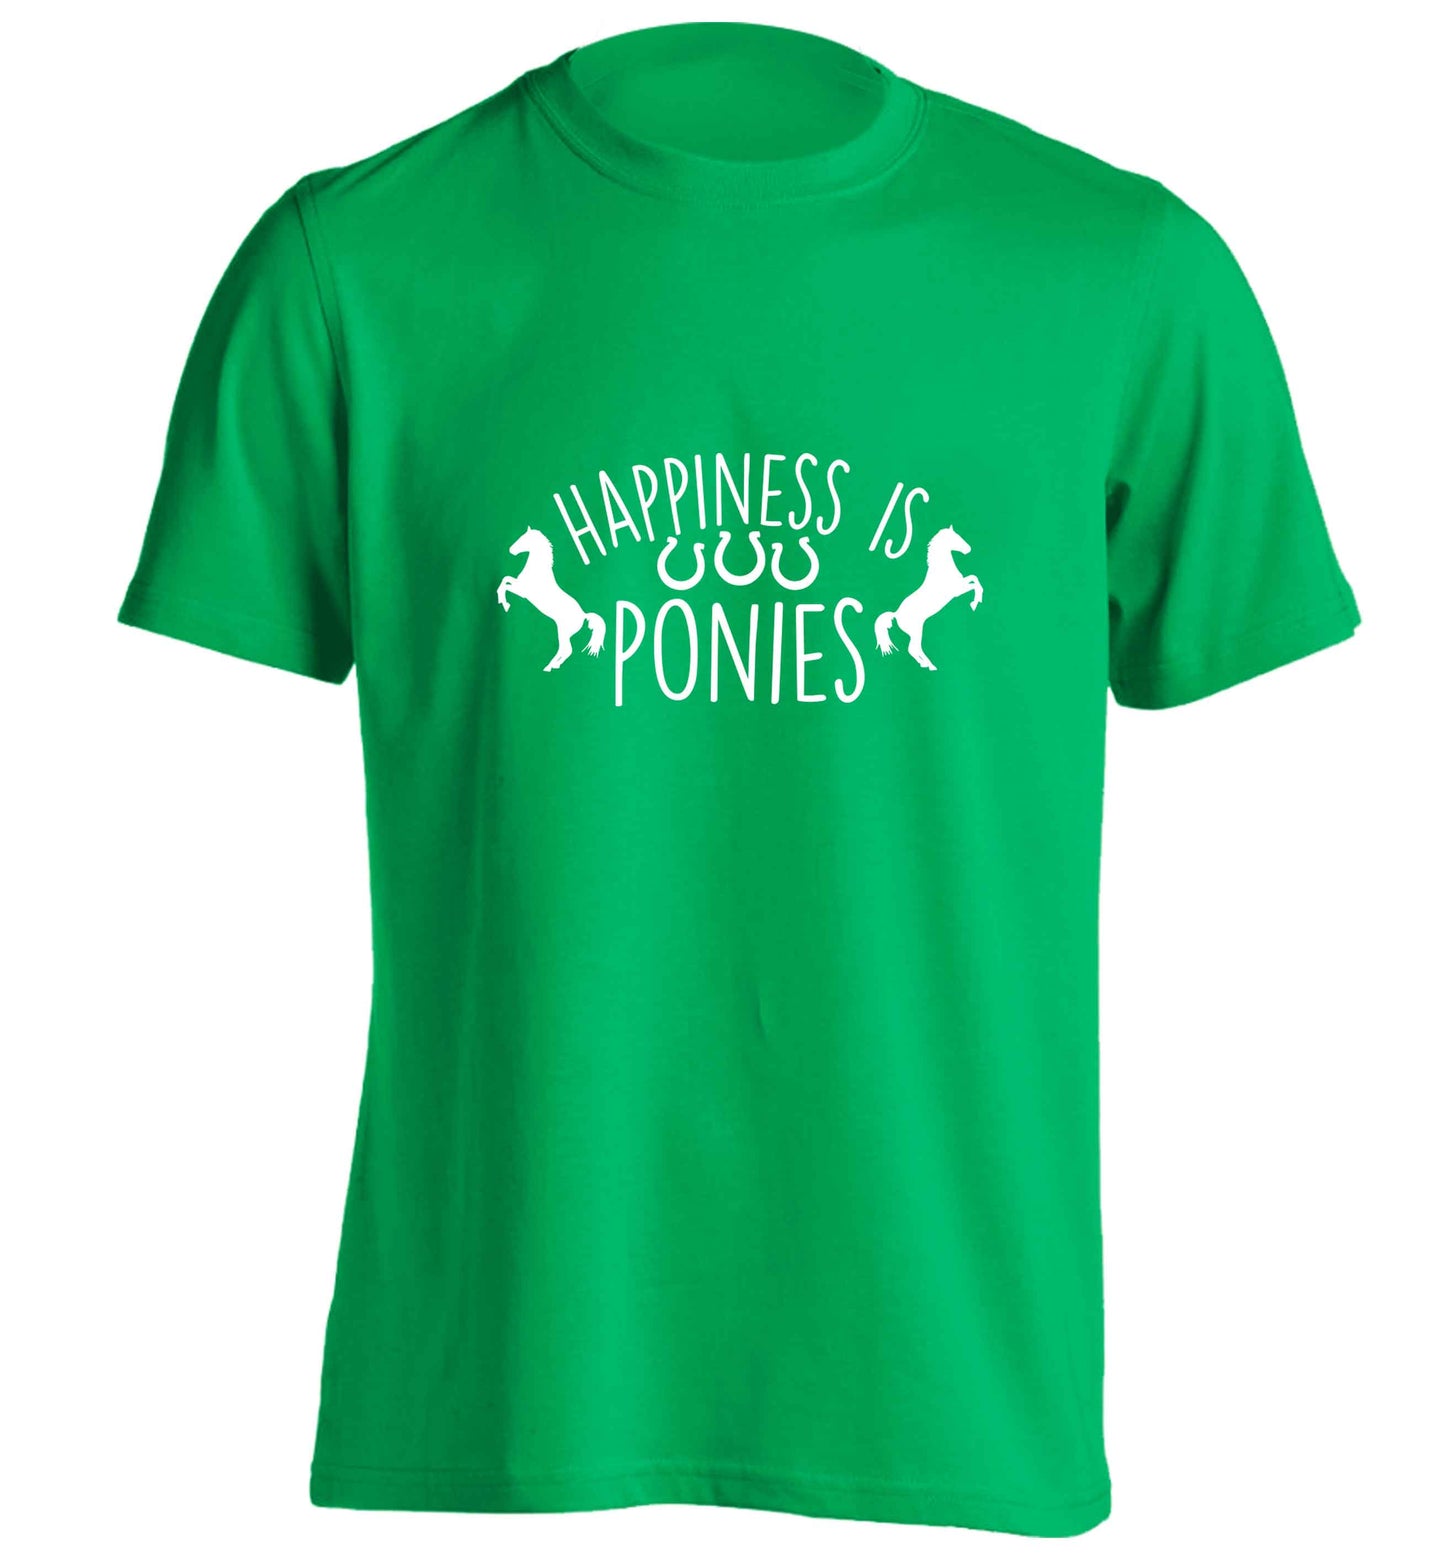 Happiness is ponies adults unisex green Tshirt 2XL